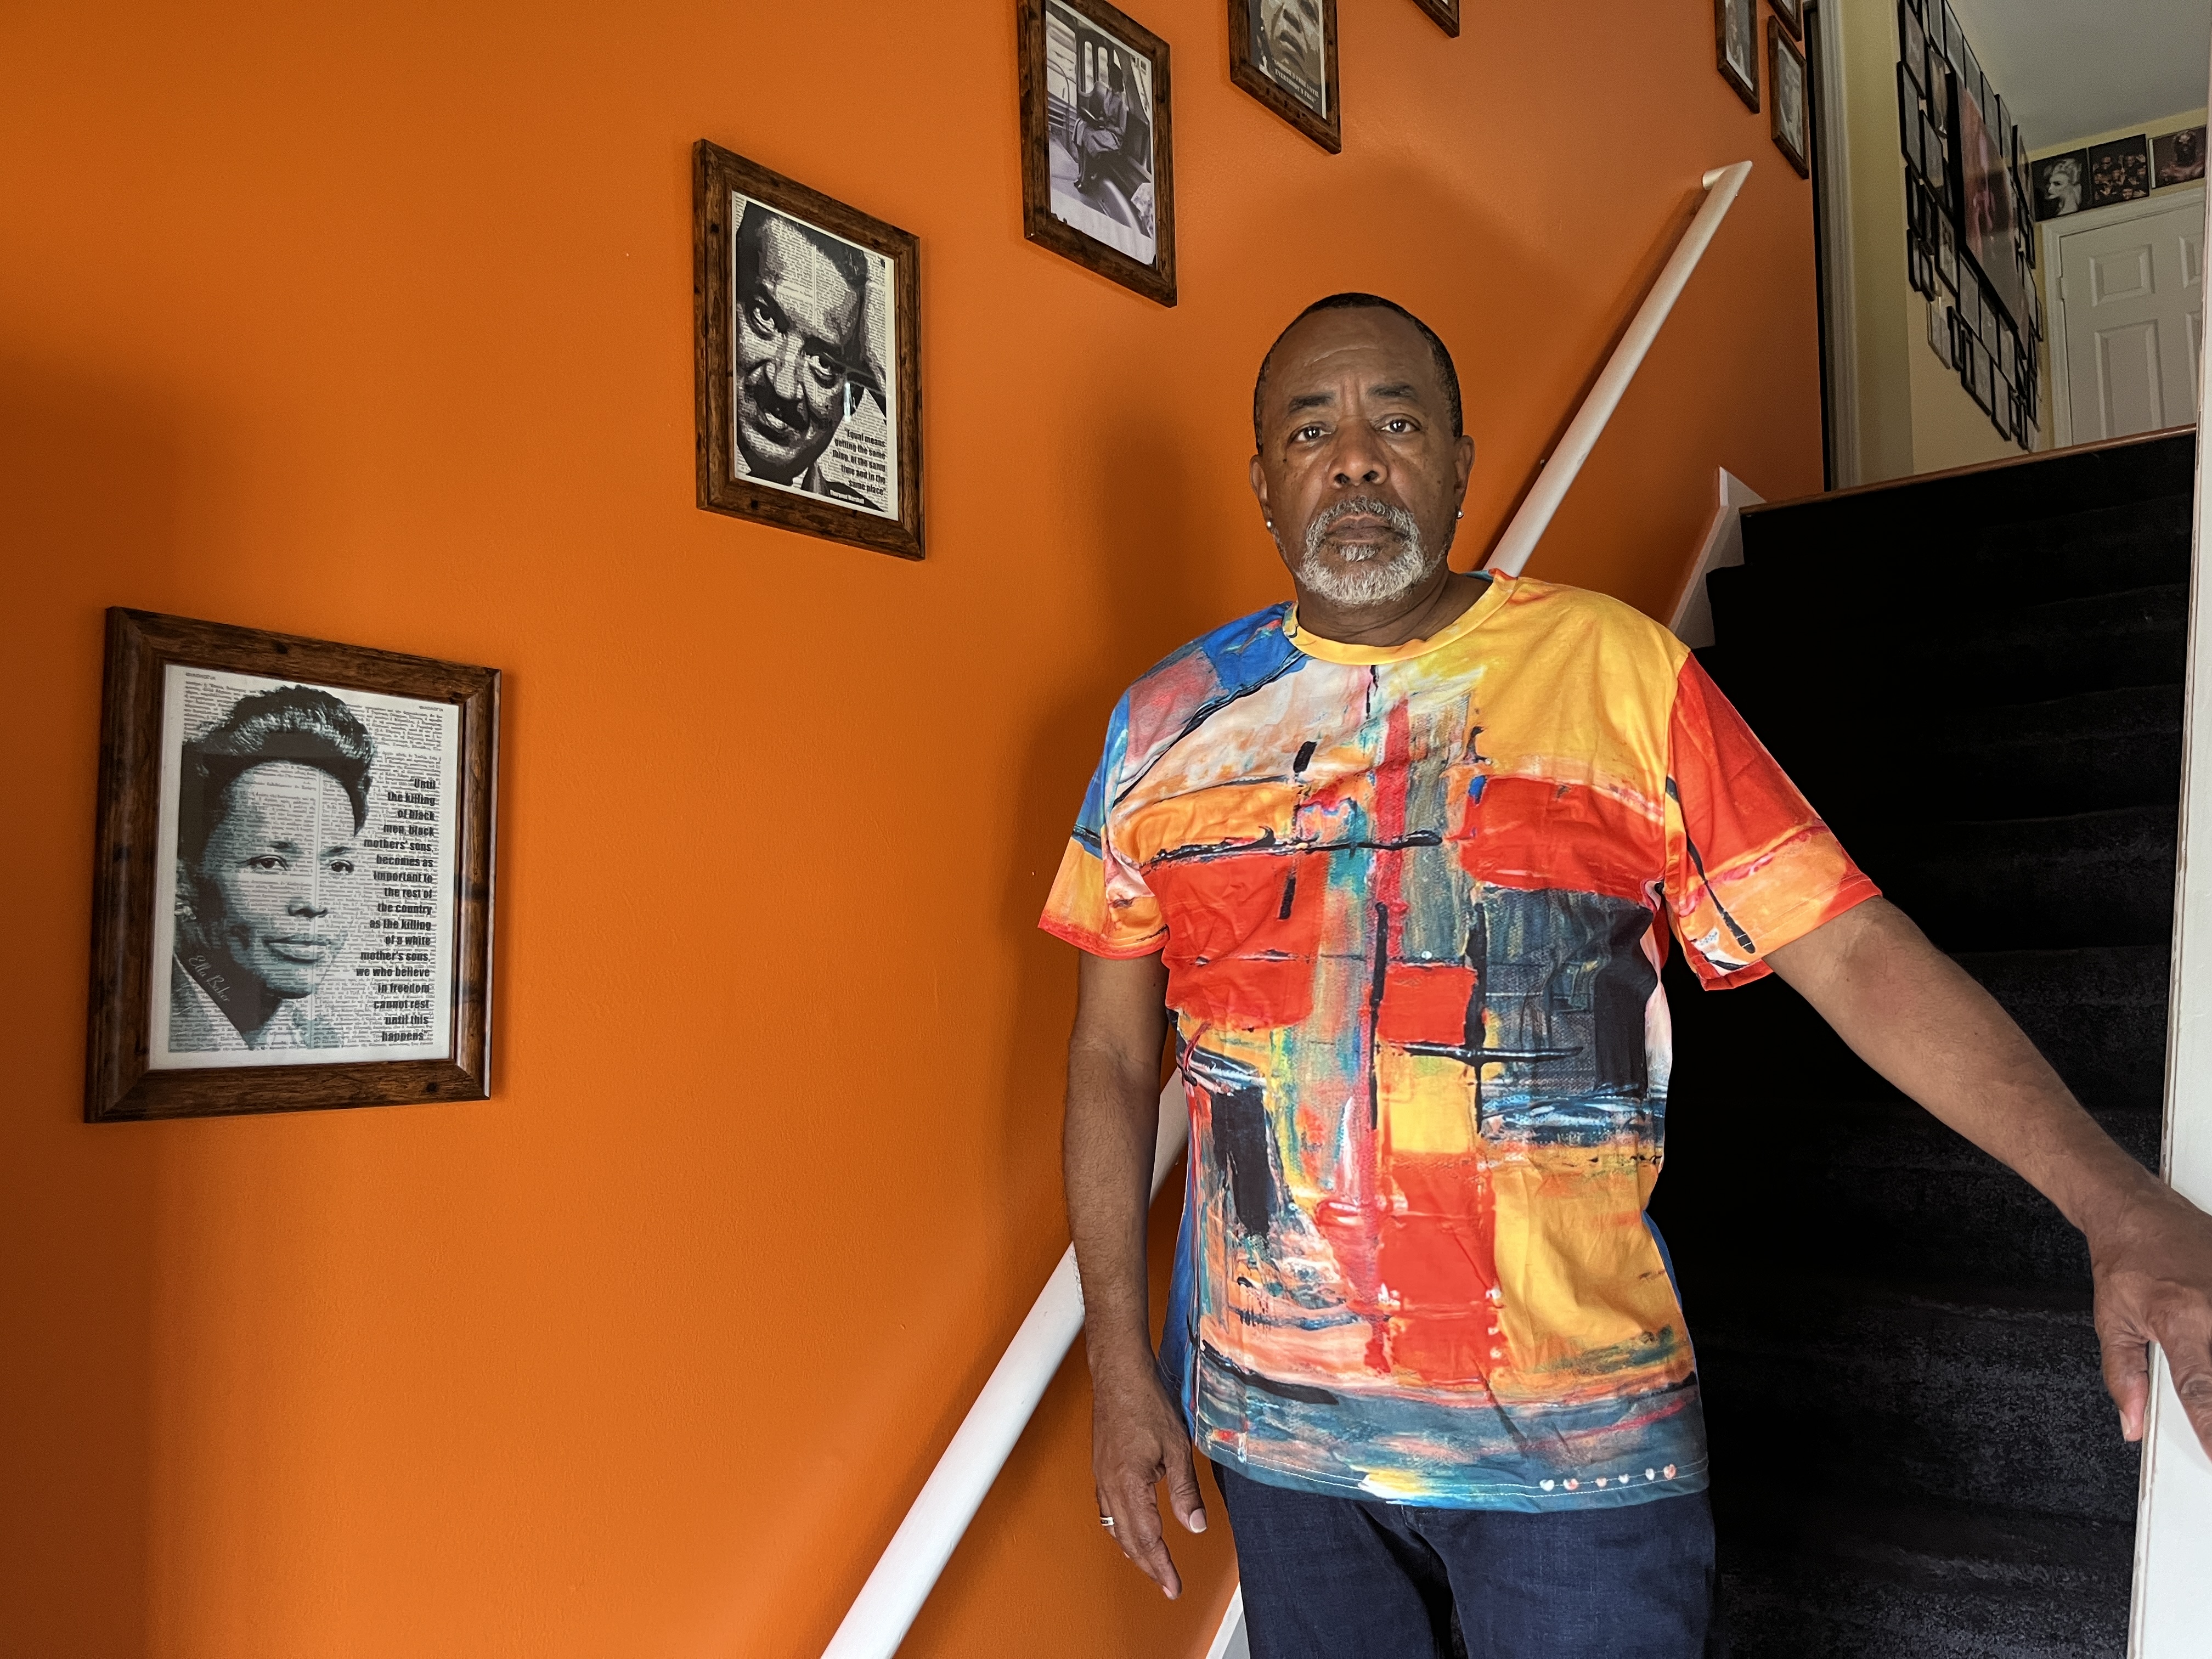 A man stands in a stair well near an orange wall decorated with pictures of notable black individuals 